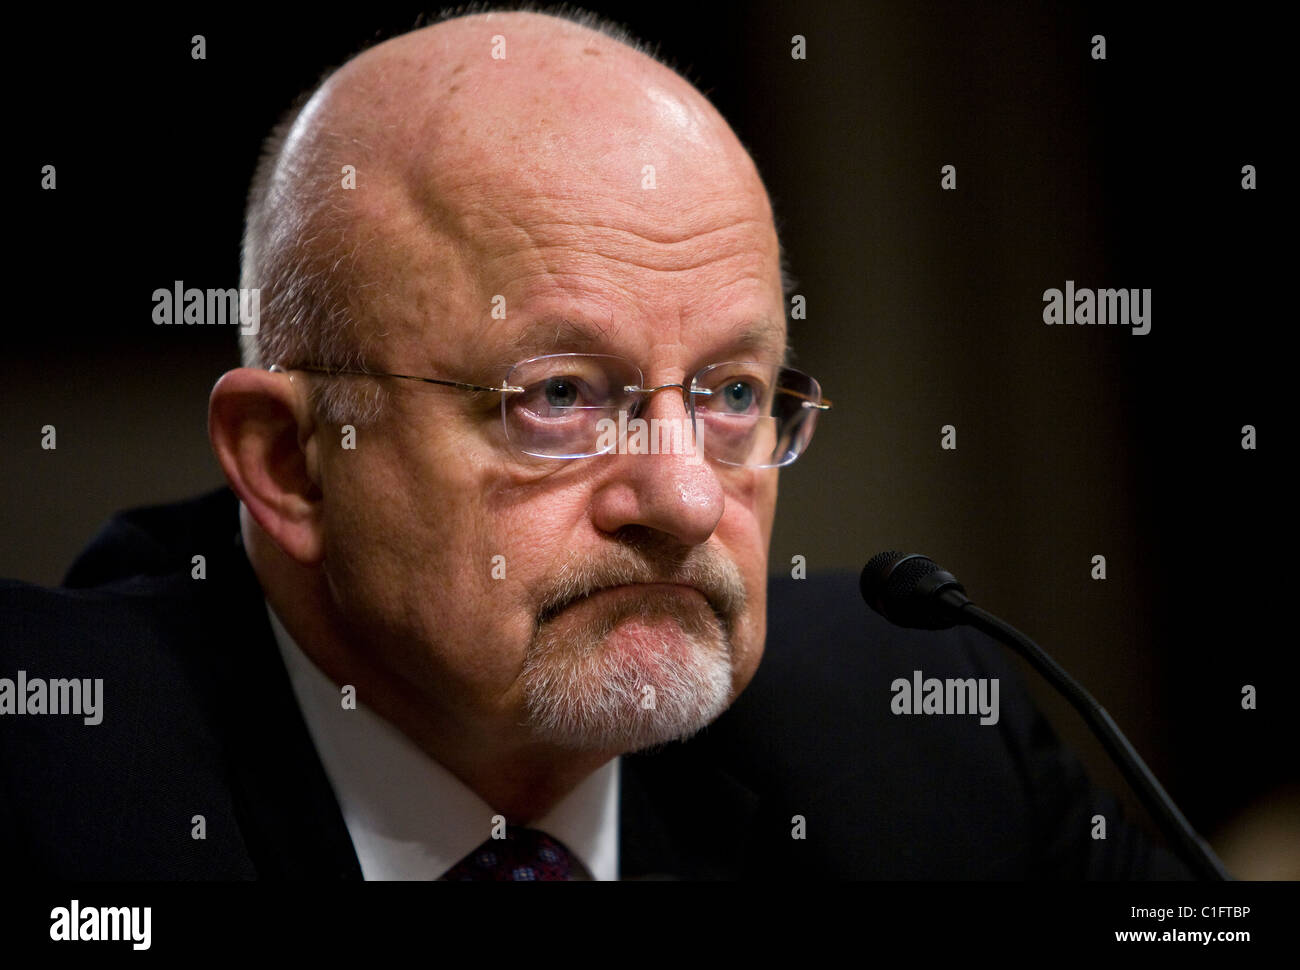 James Clapper, Director of National Intelligence.  Stock Photo